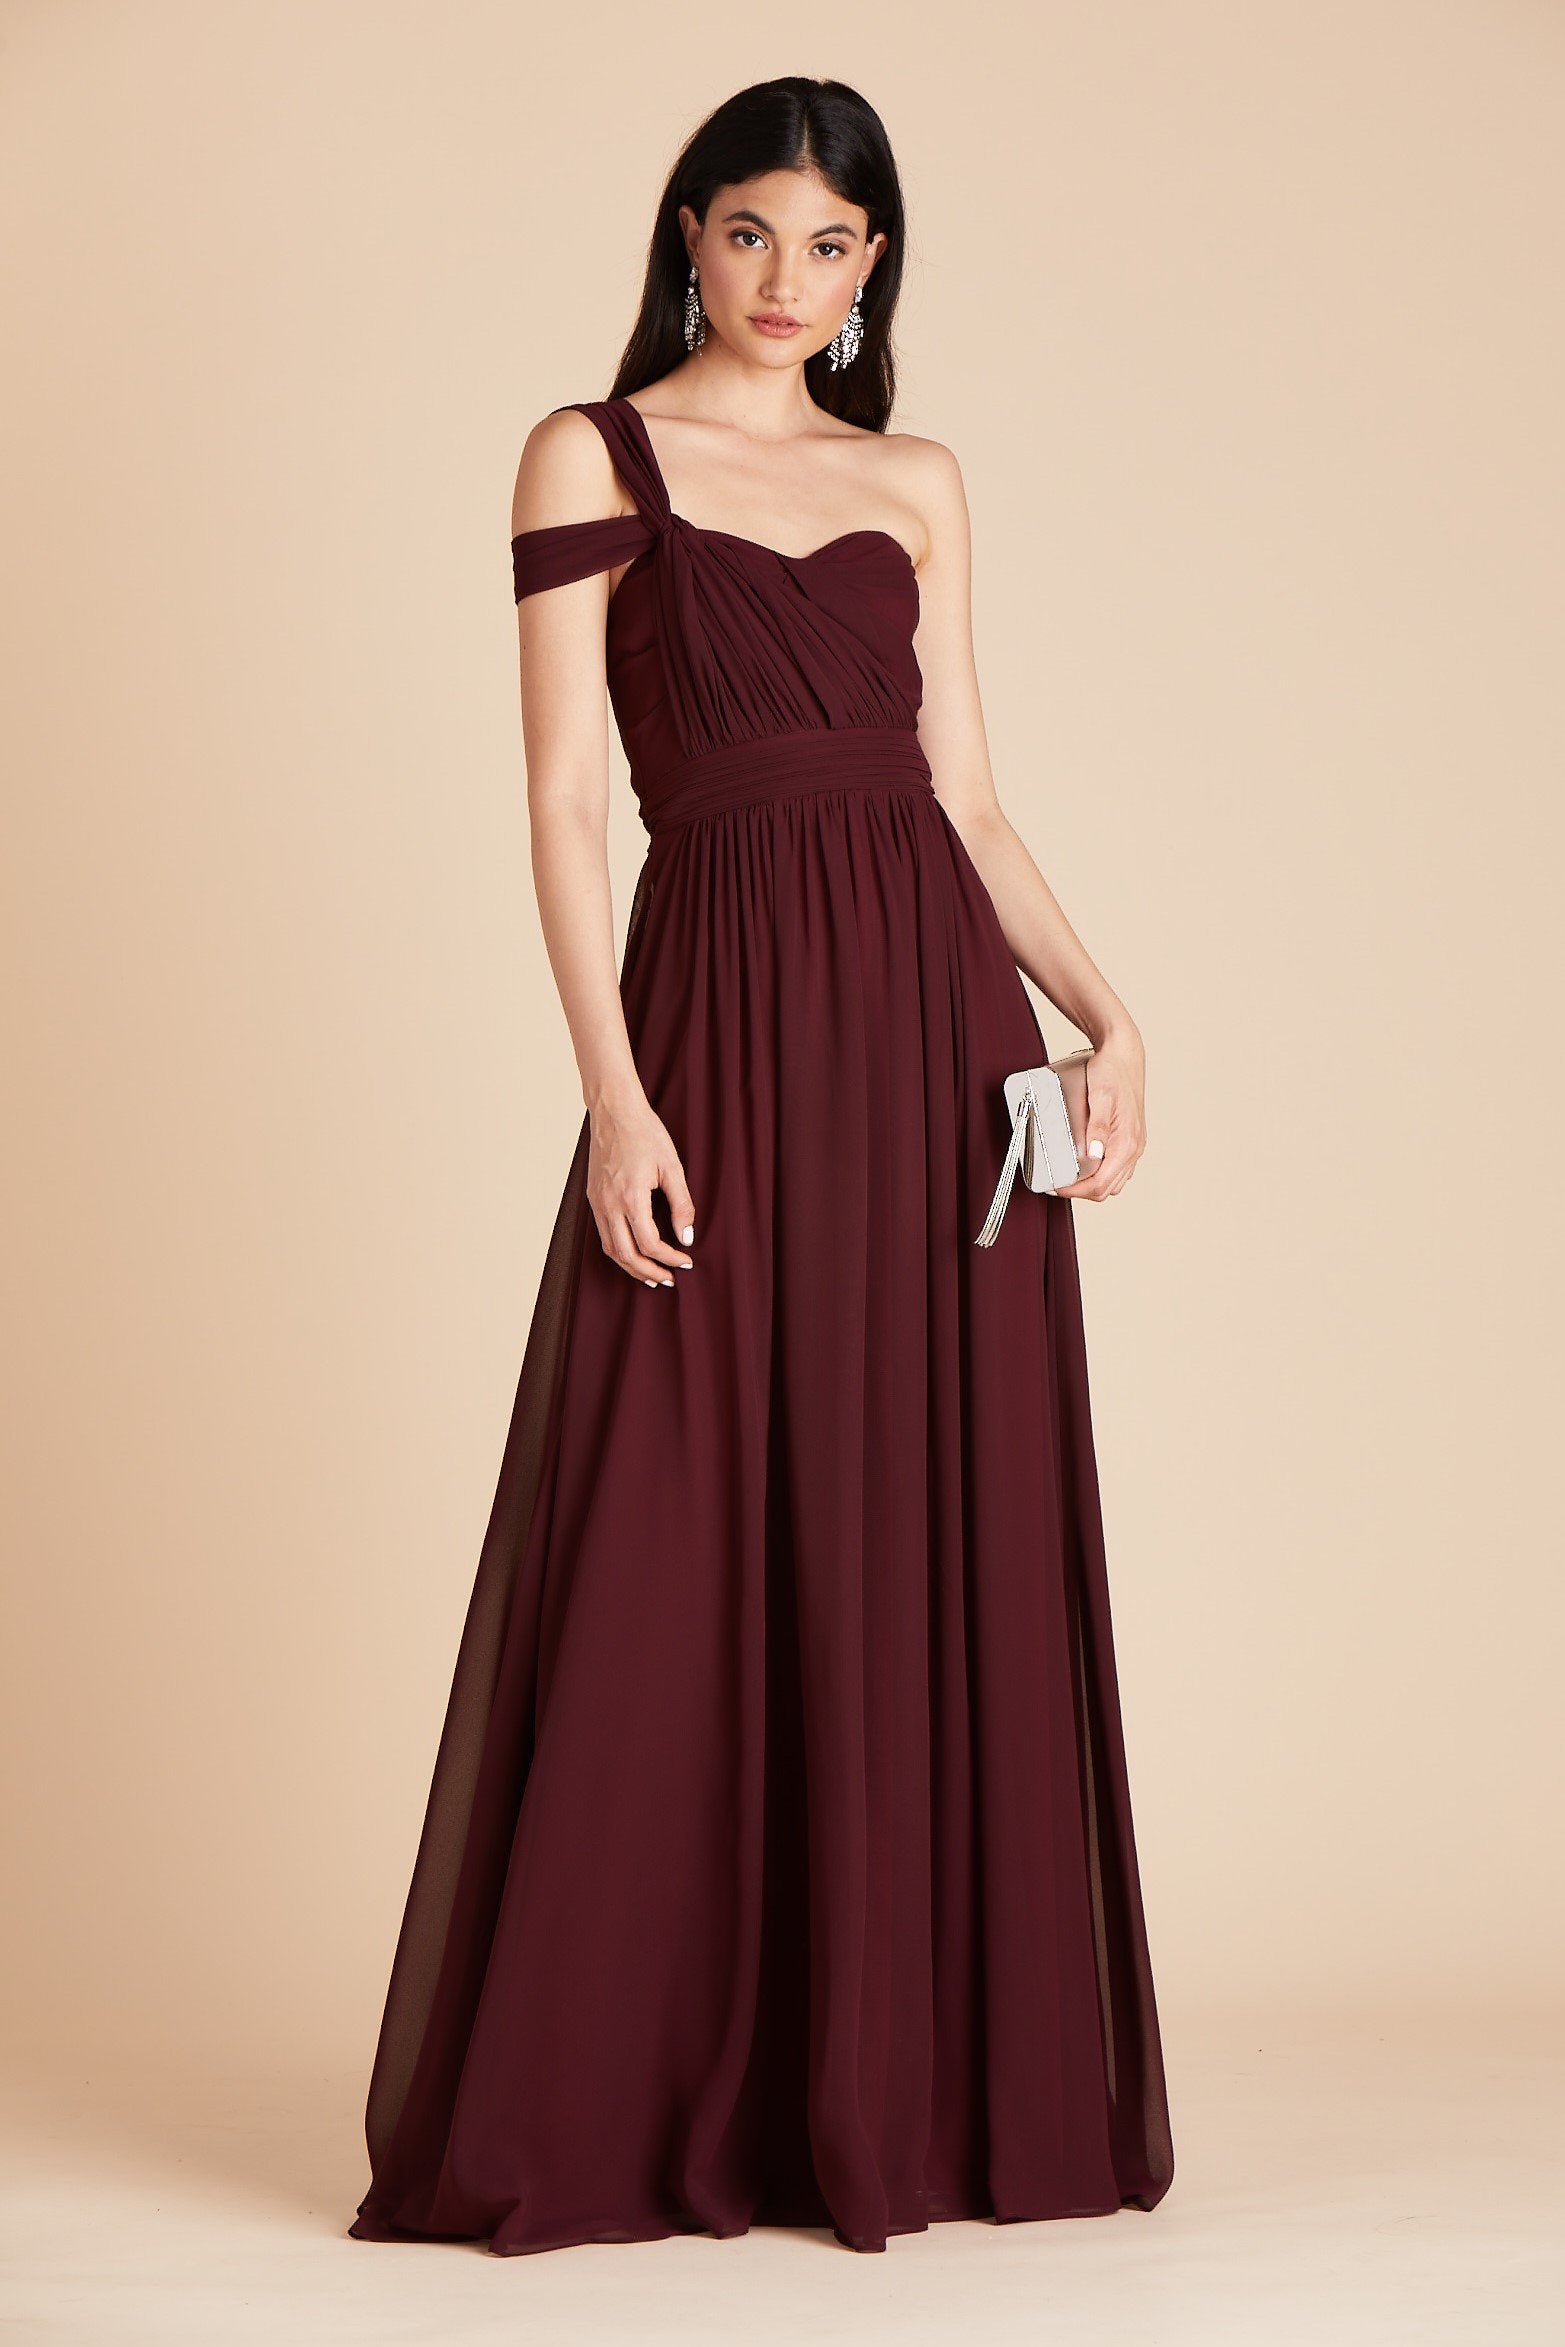 Grace convertible bridesmaid dress in cabernet burgundy chiffon by Birdy Grey, front view